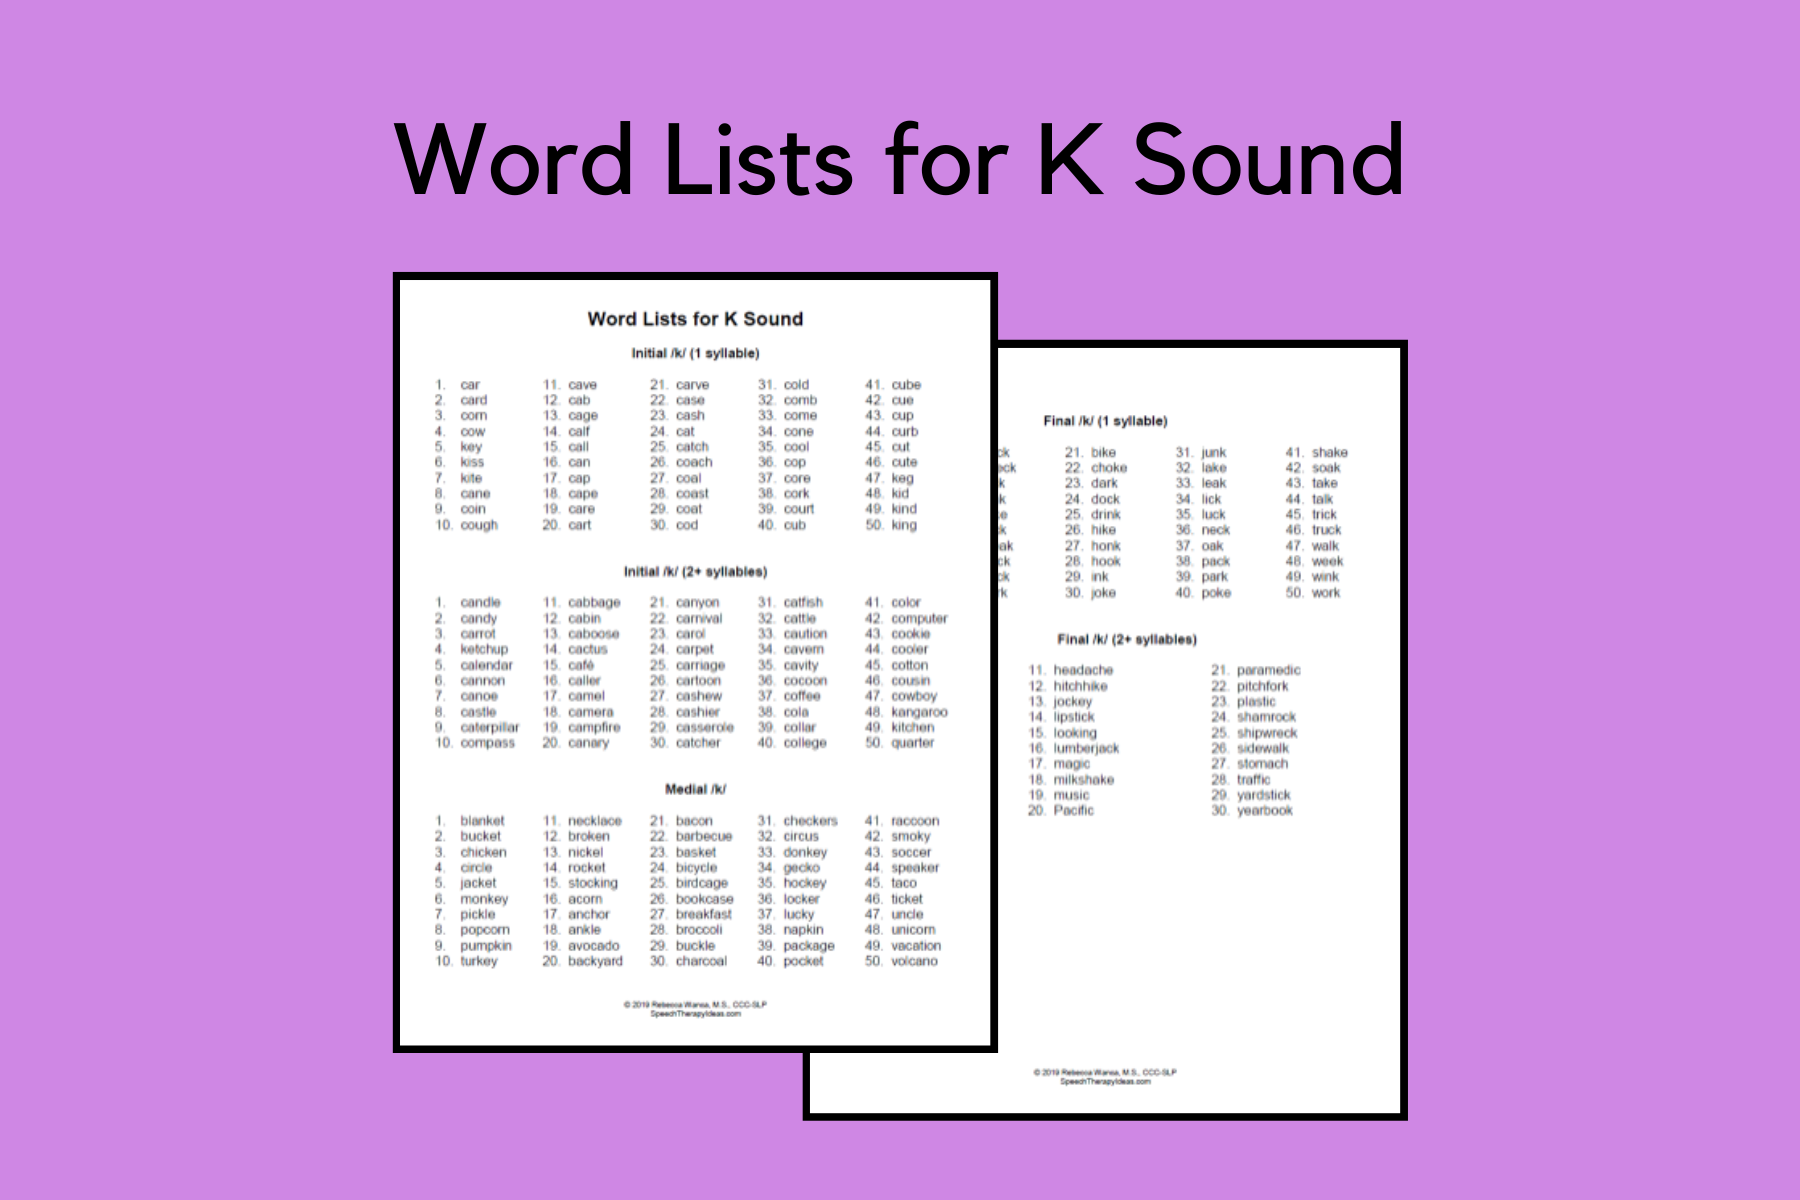 Word Lists for K Sounds